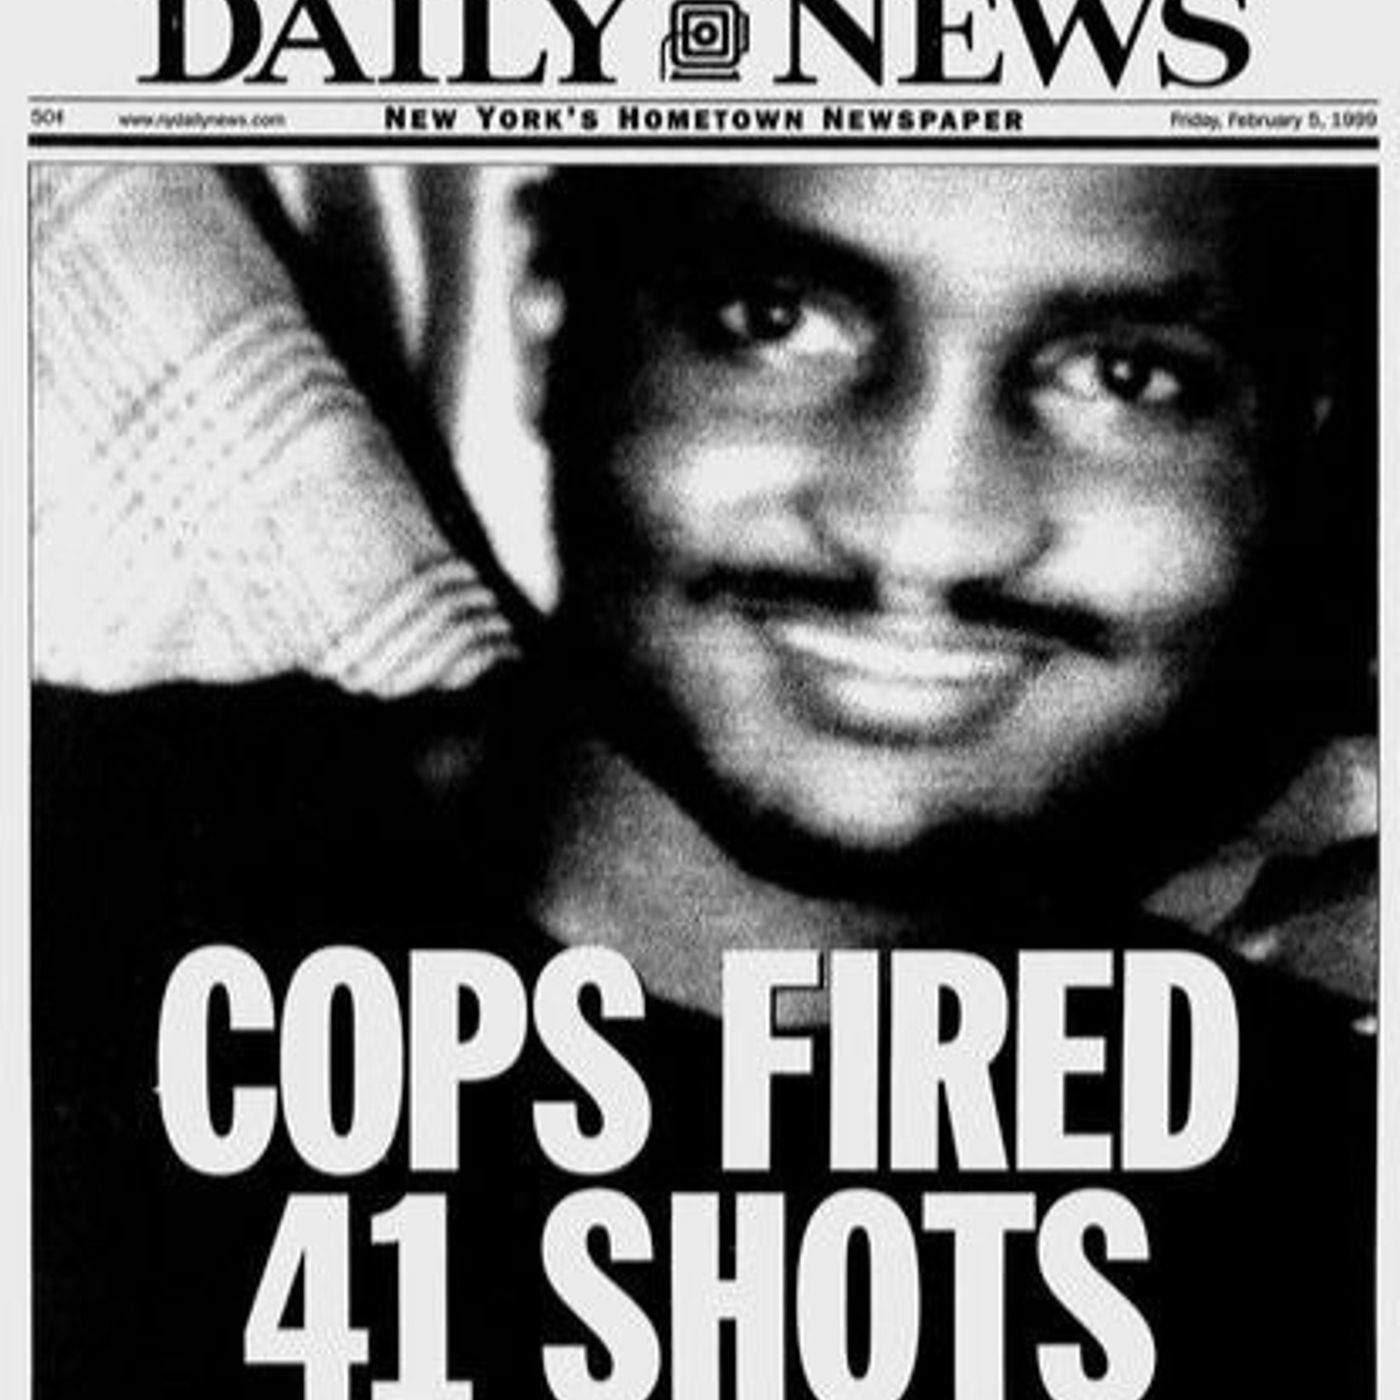 142: 41 Shots: The Killing of Amadou Diallo (Trial By Media Episode 3) by True Crime Obsessed